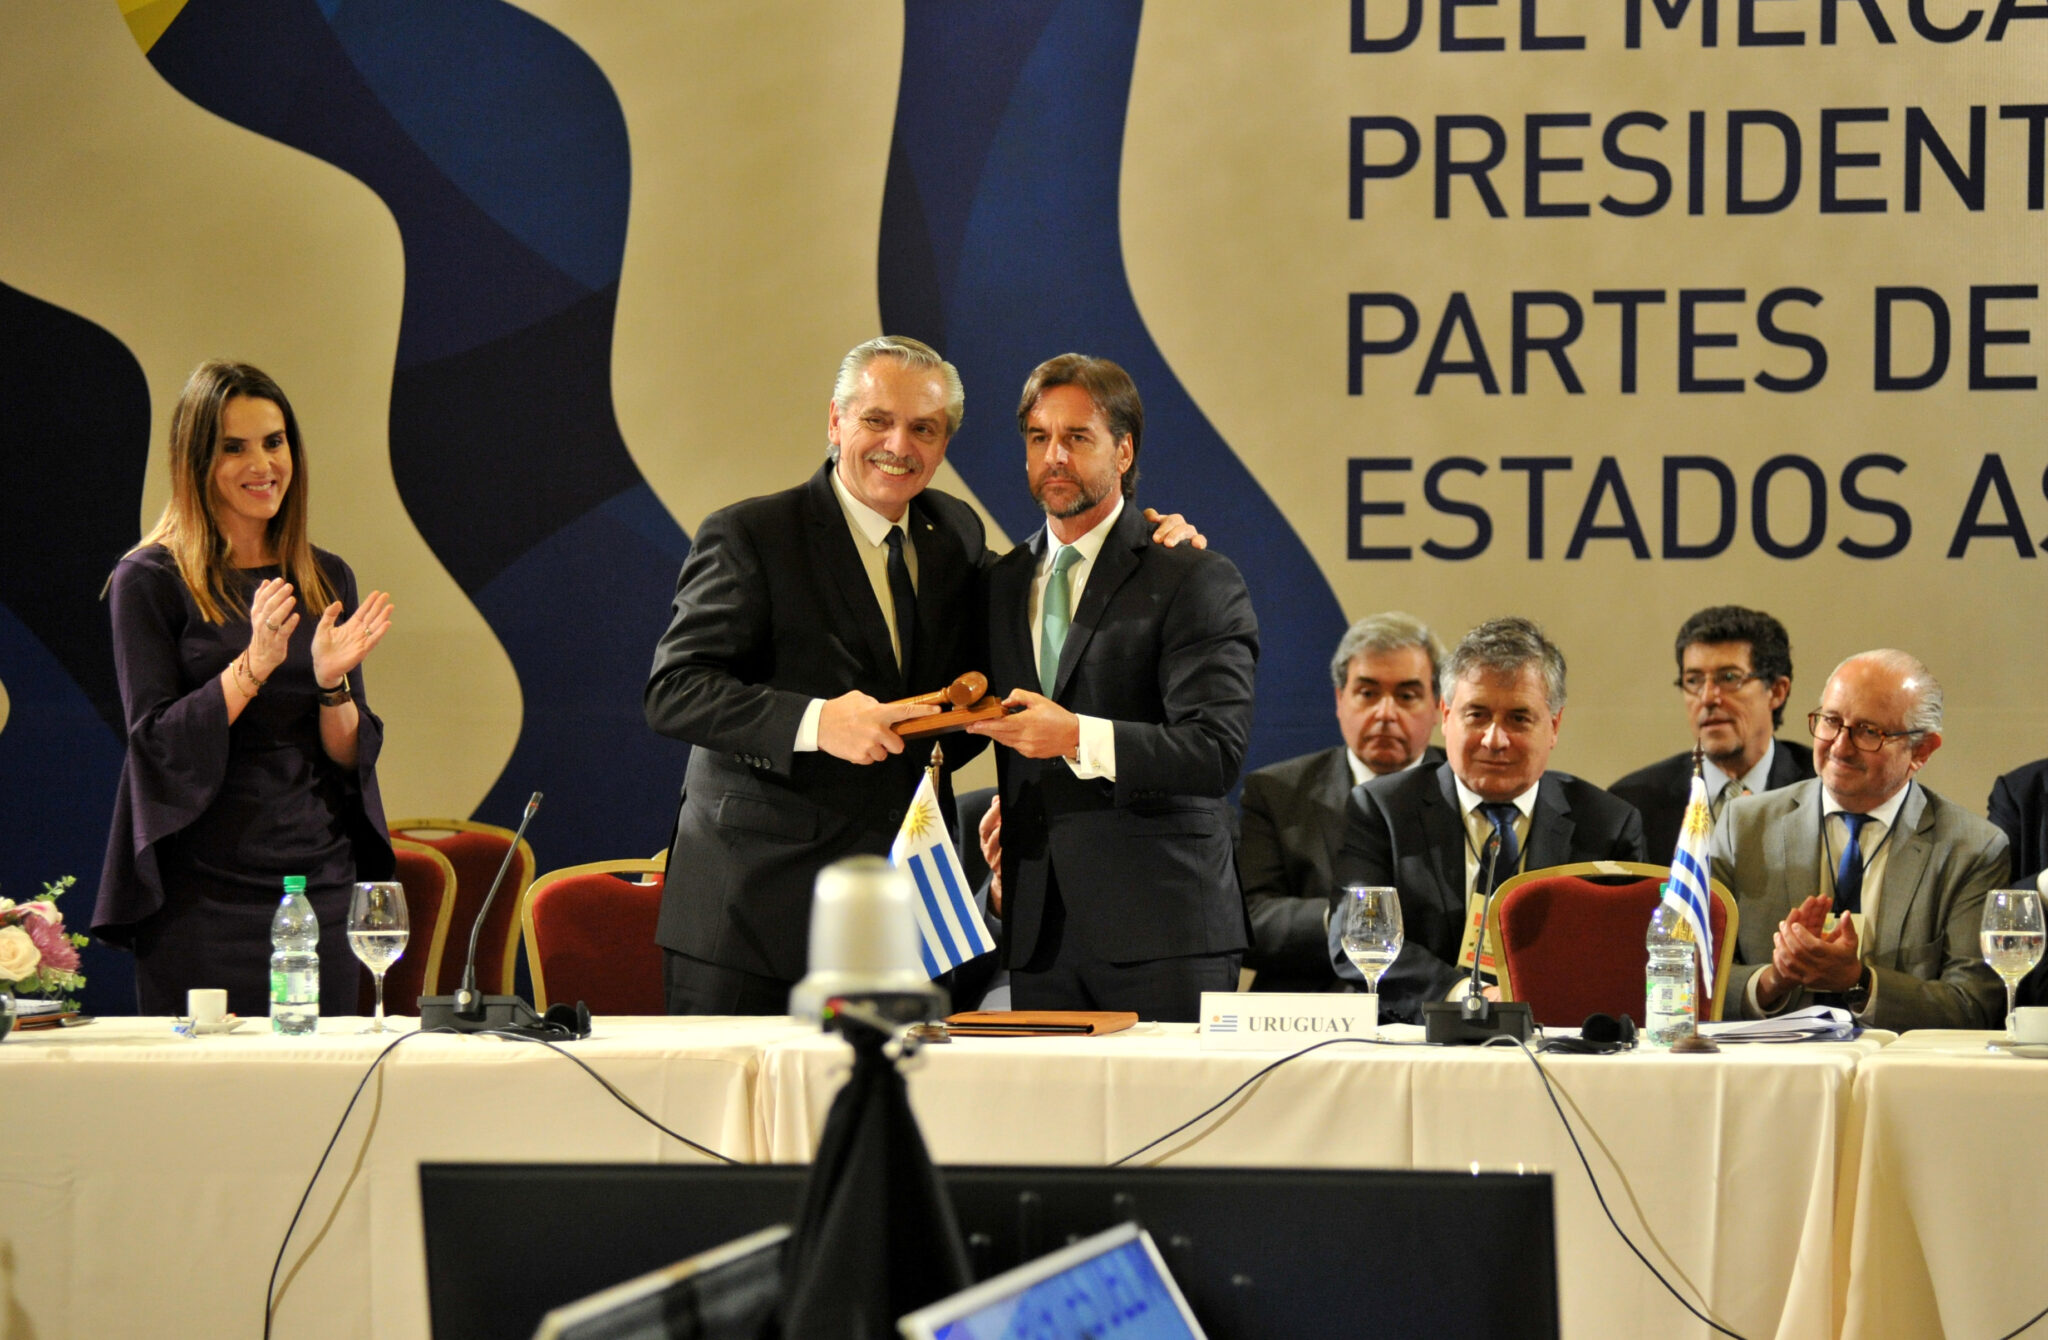 "We want to compete on equal terms and that is what we appeal to from Mercosur partners"